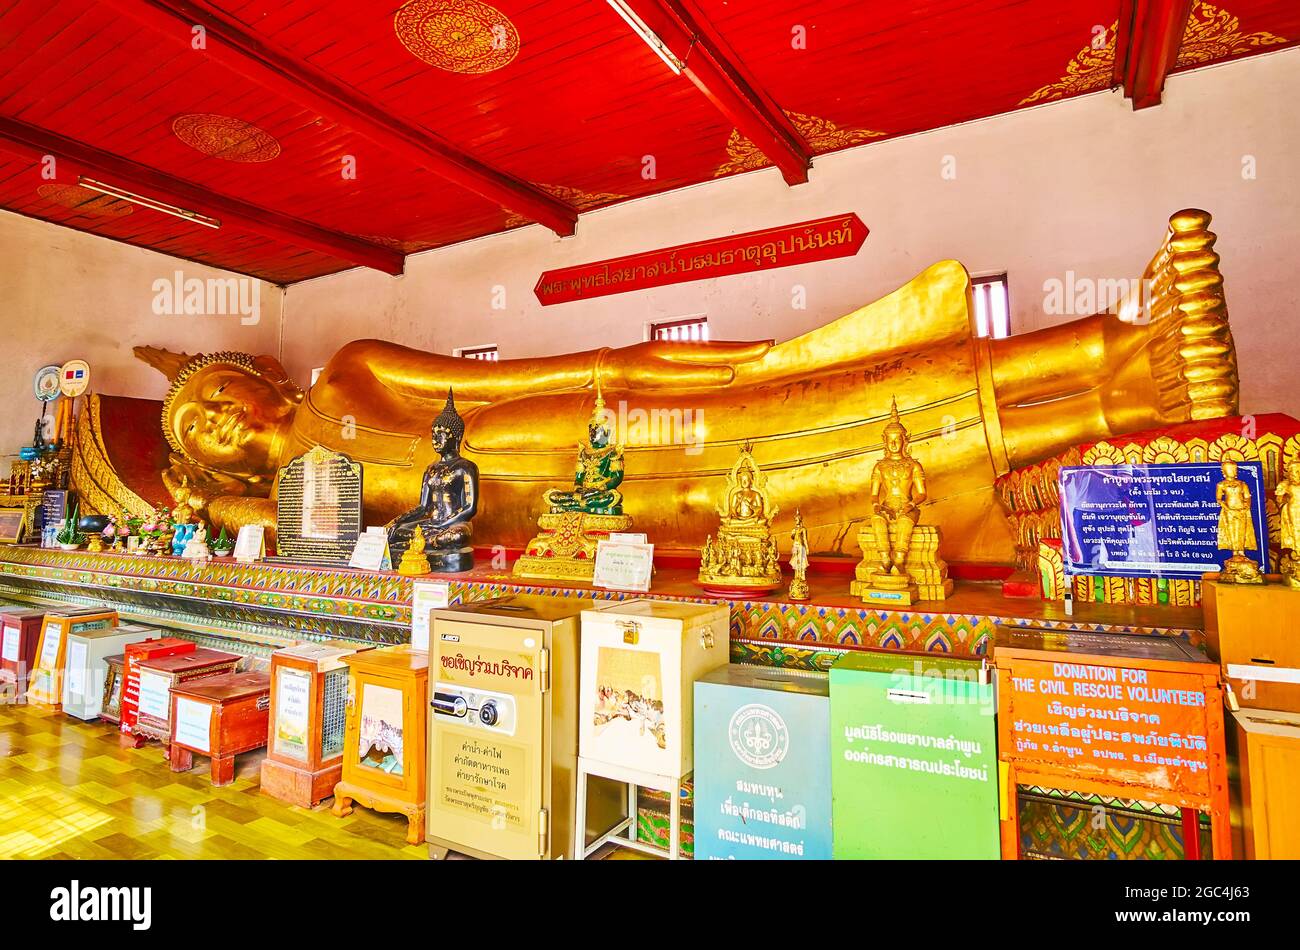 LAMHPUN, THAILAND - MAY 8, 2019: Interior of the Image House with large golden Reclining Buddha and small imagesof Buddha in front of it, Wat Phra Tha Stock Photo